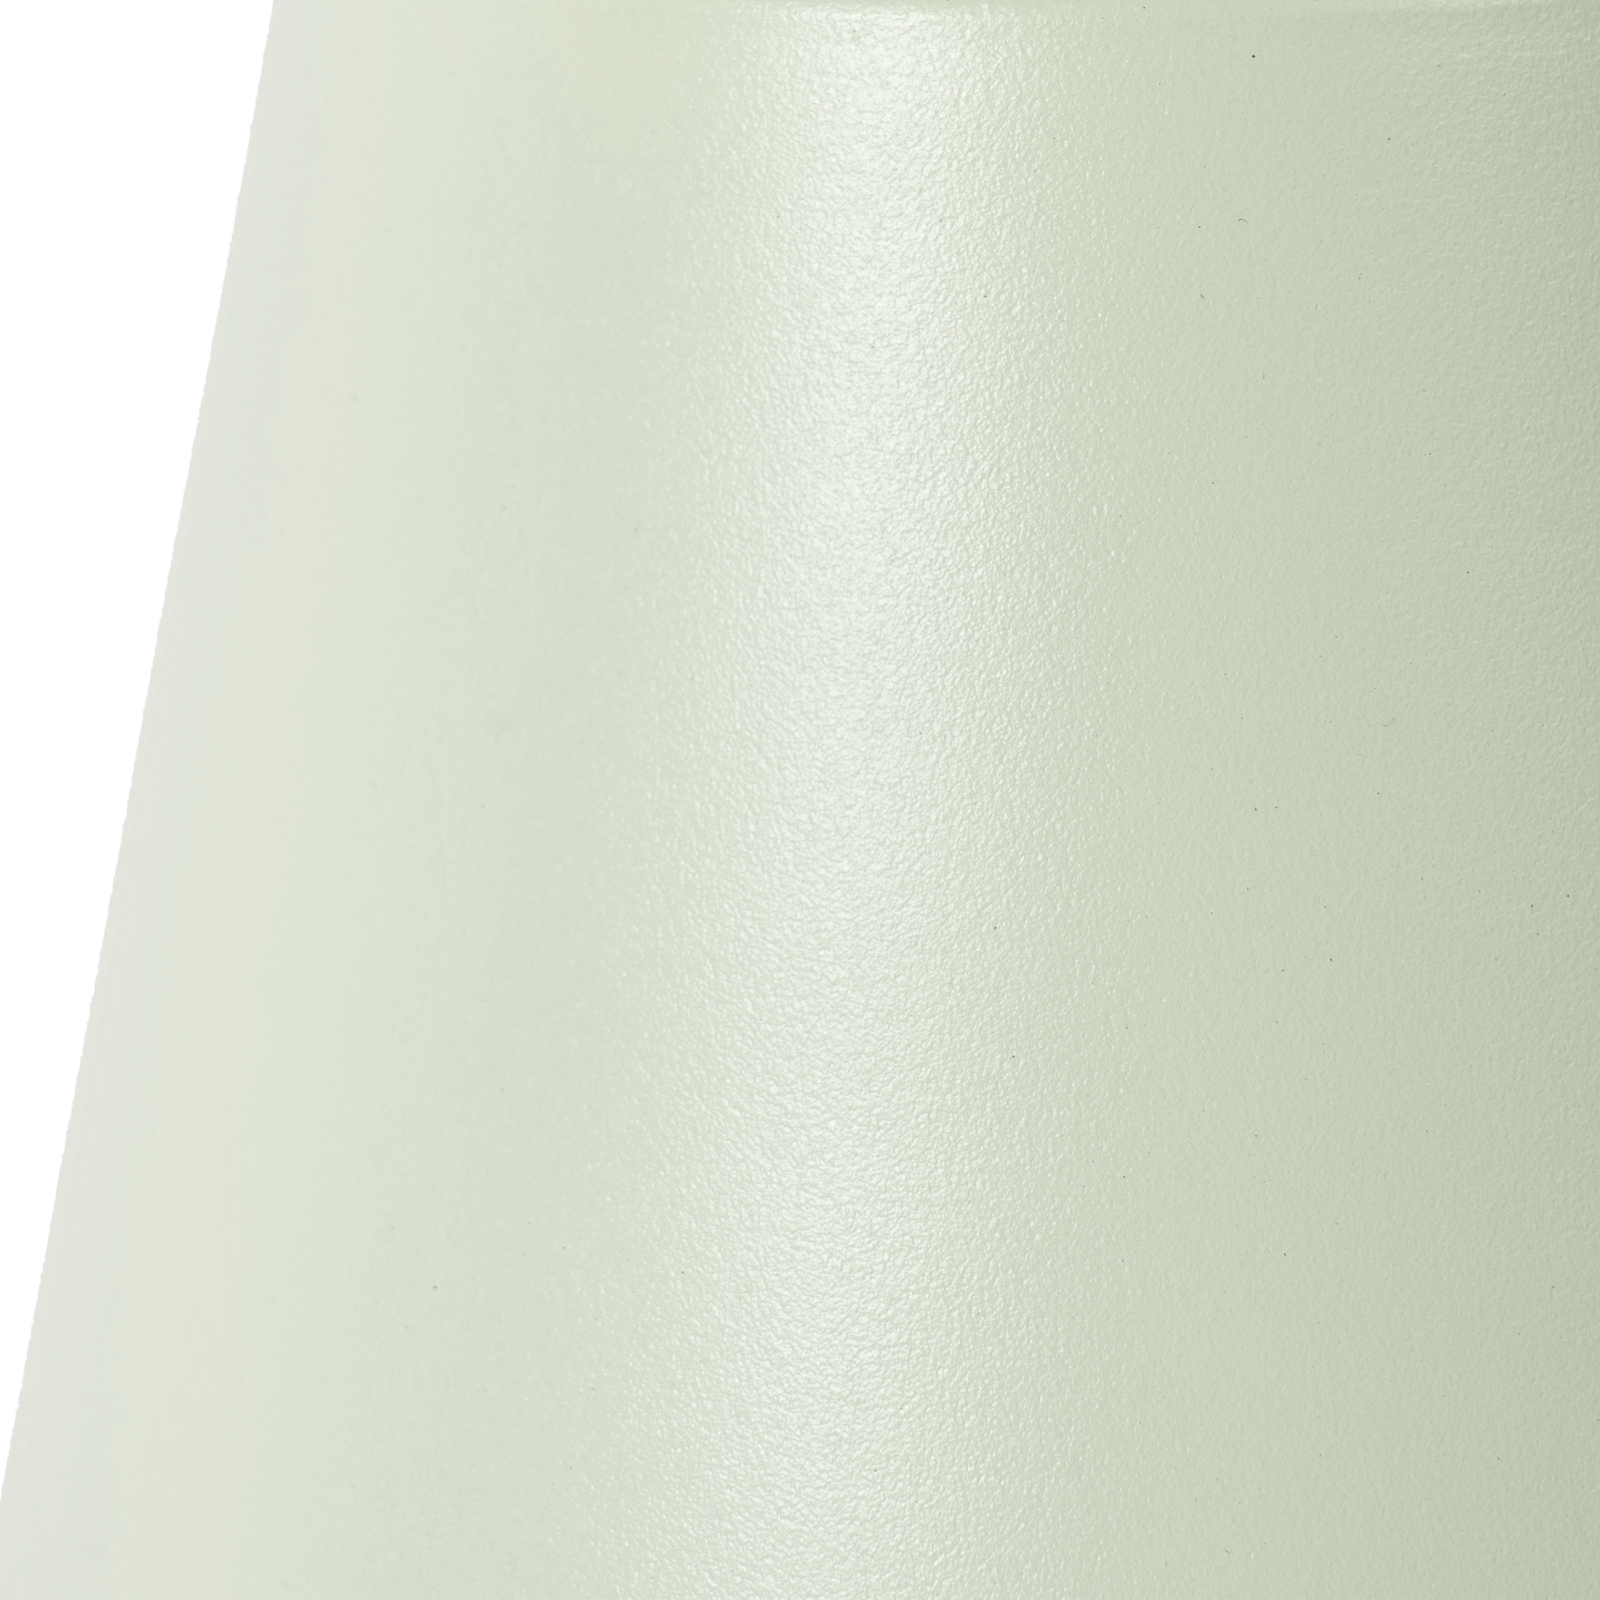 Lindby LED rechargeable table lamp Janea TWIN, green, metal